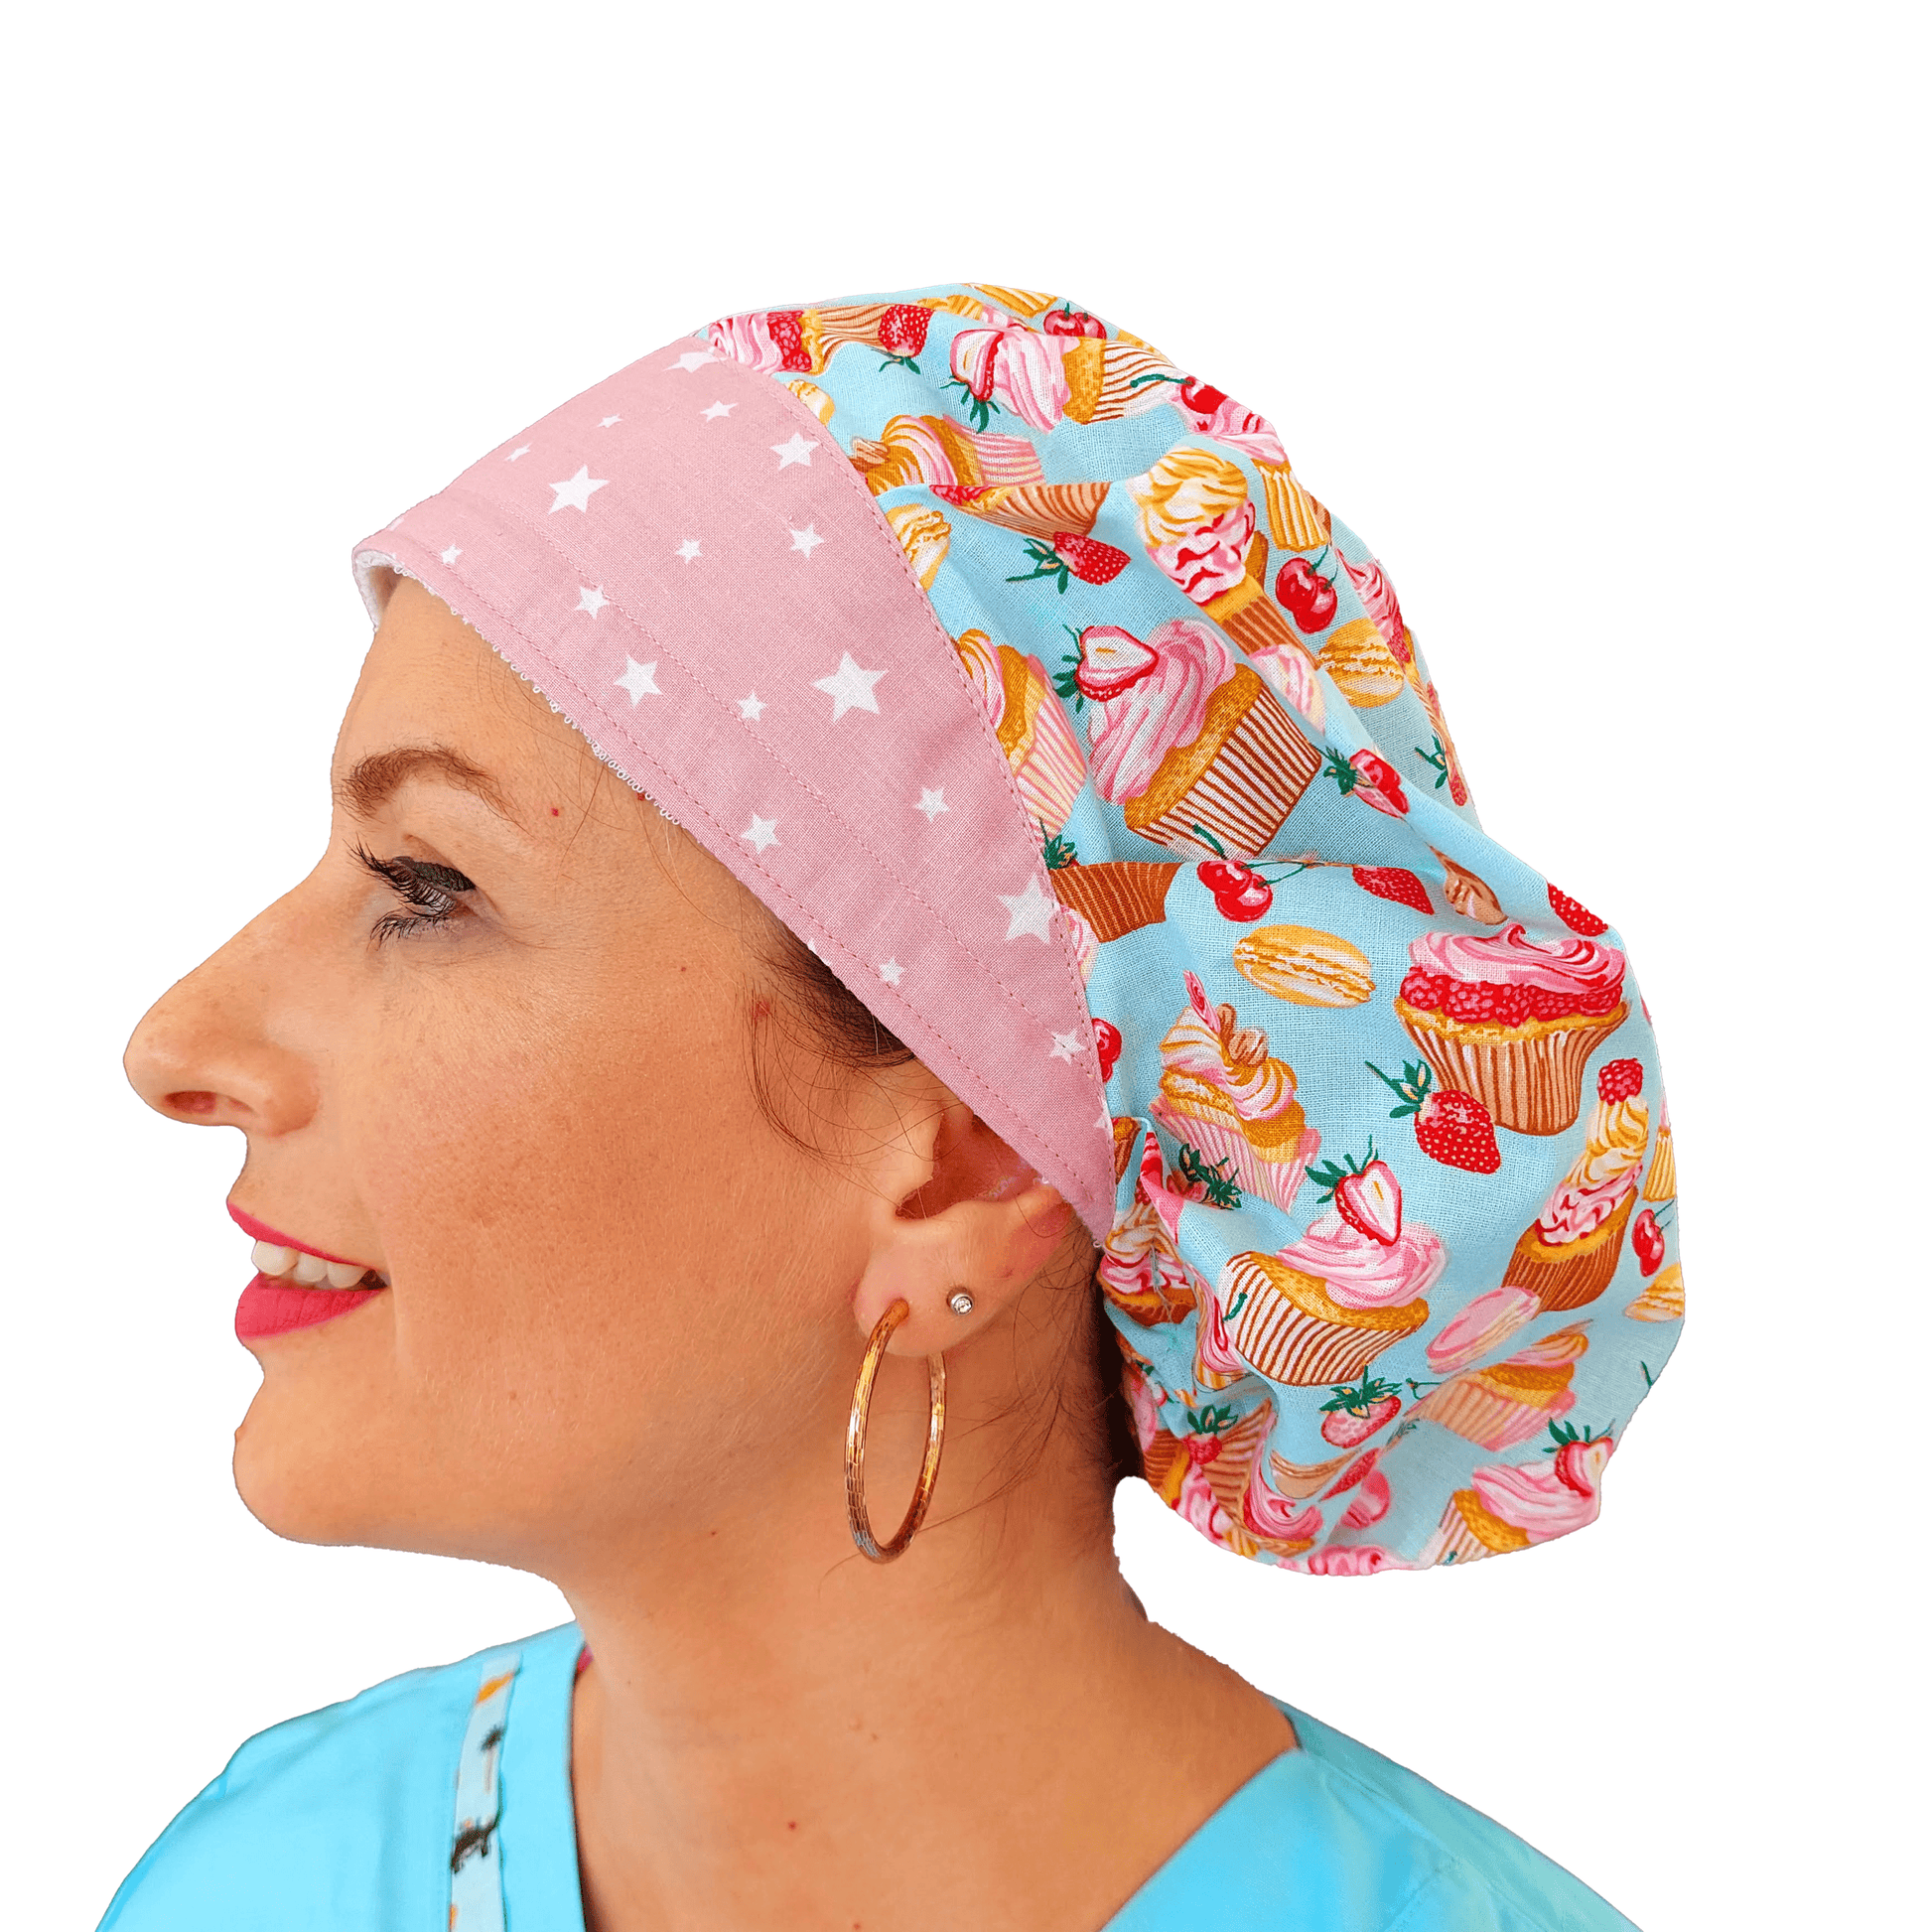 Scrub Hat Bouffant, Pastry Hat with Cupcakes